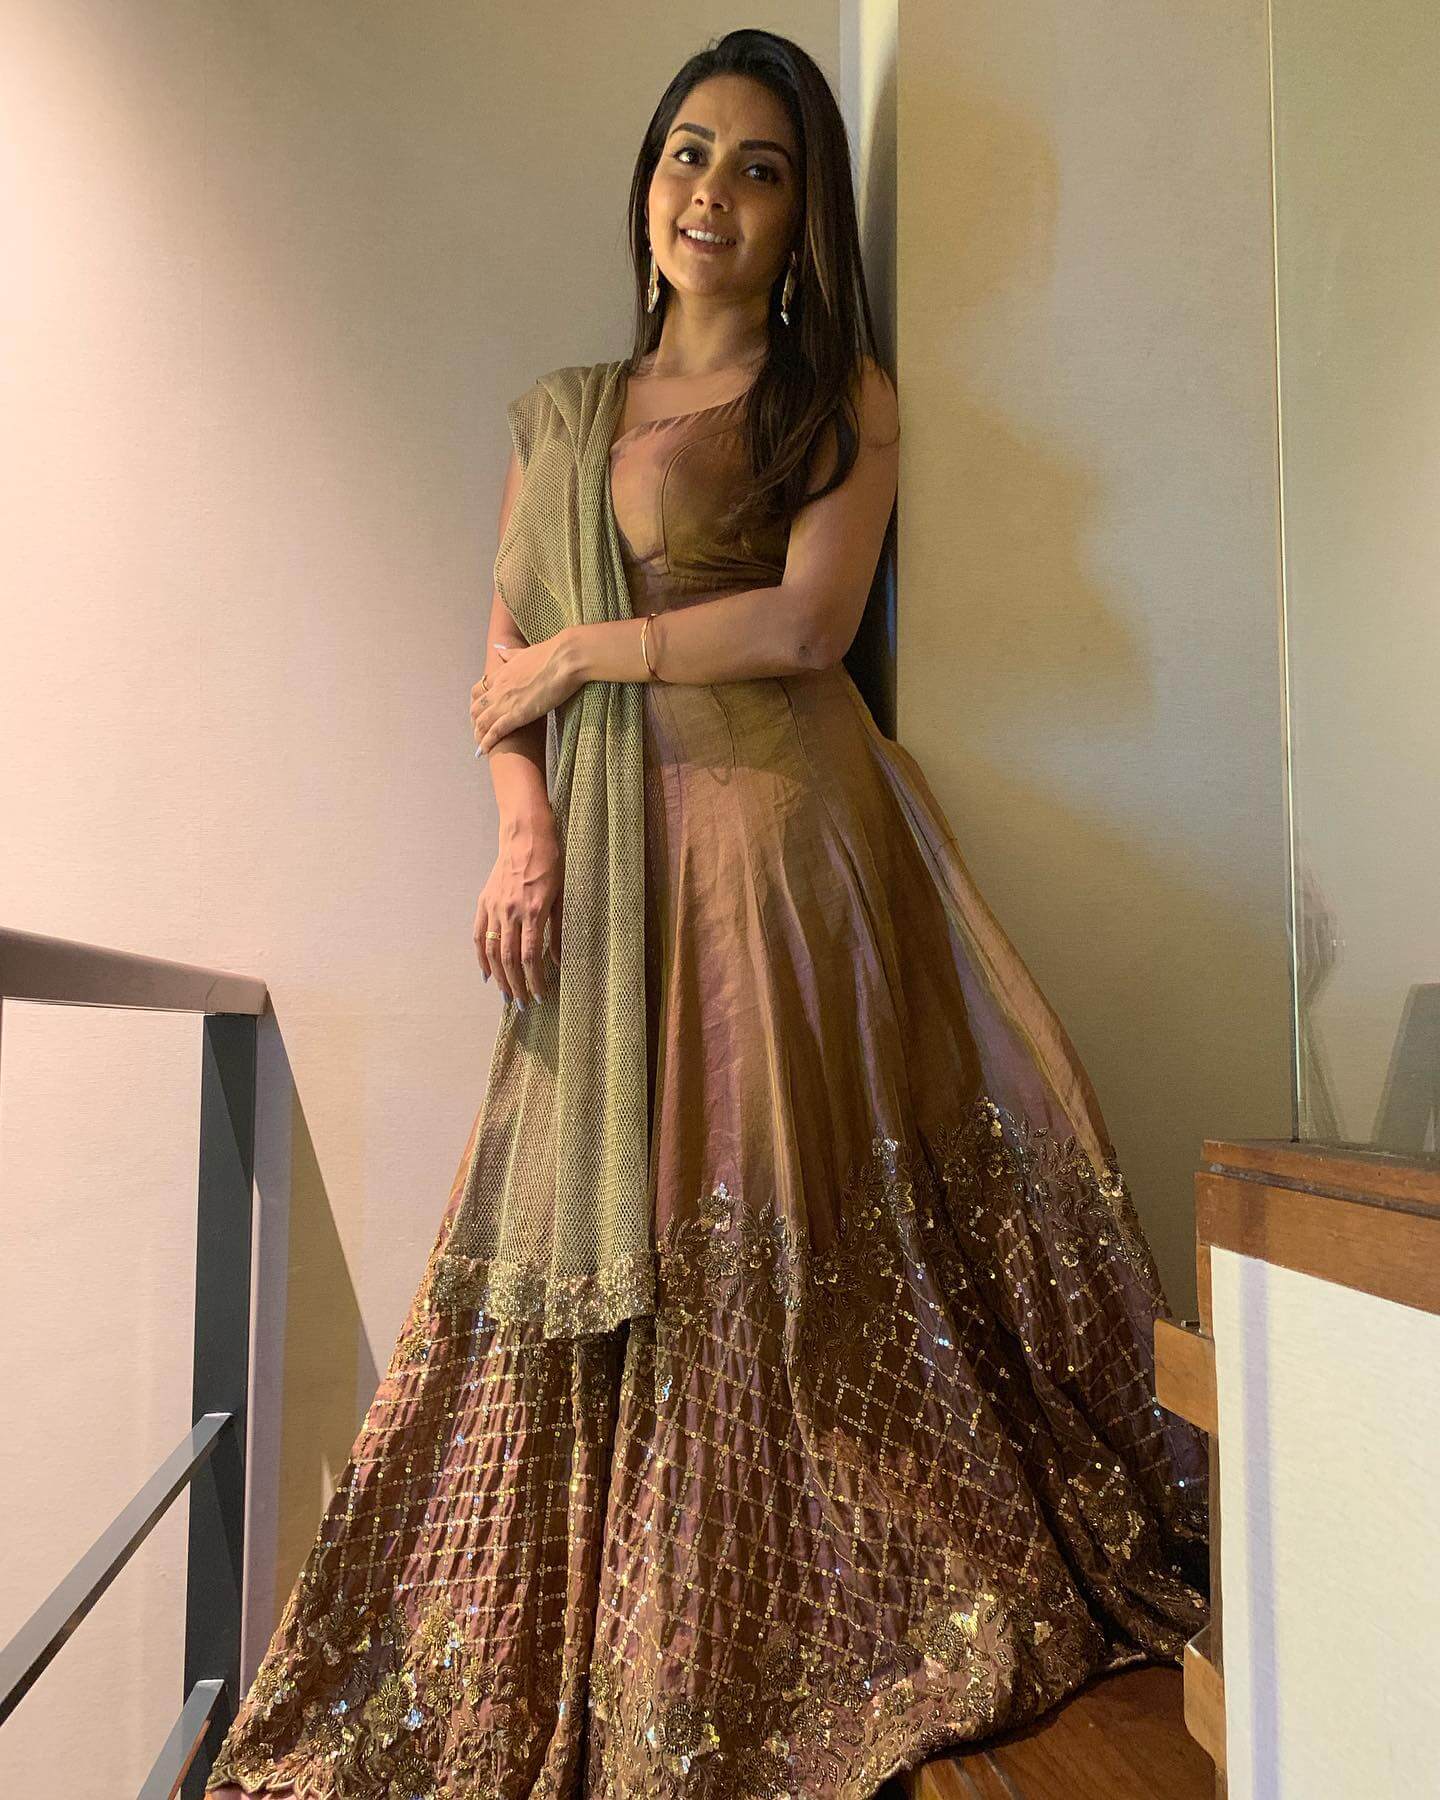 Mahima Nambiar In Golden Embellished Anarkali Suit With Olive Net Dupatta Can Be Your Fabulous, Festive Outfits And Looks